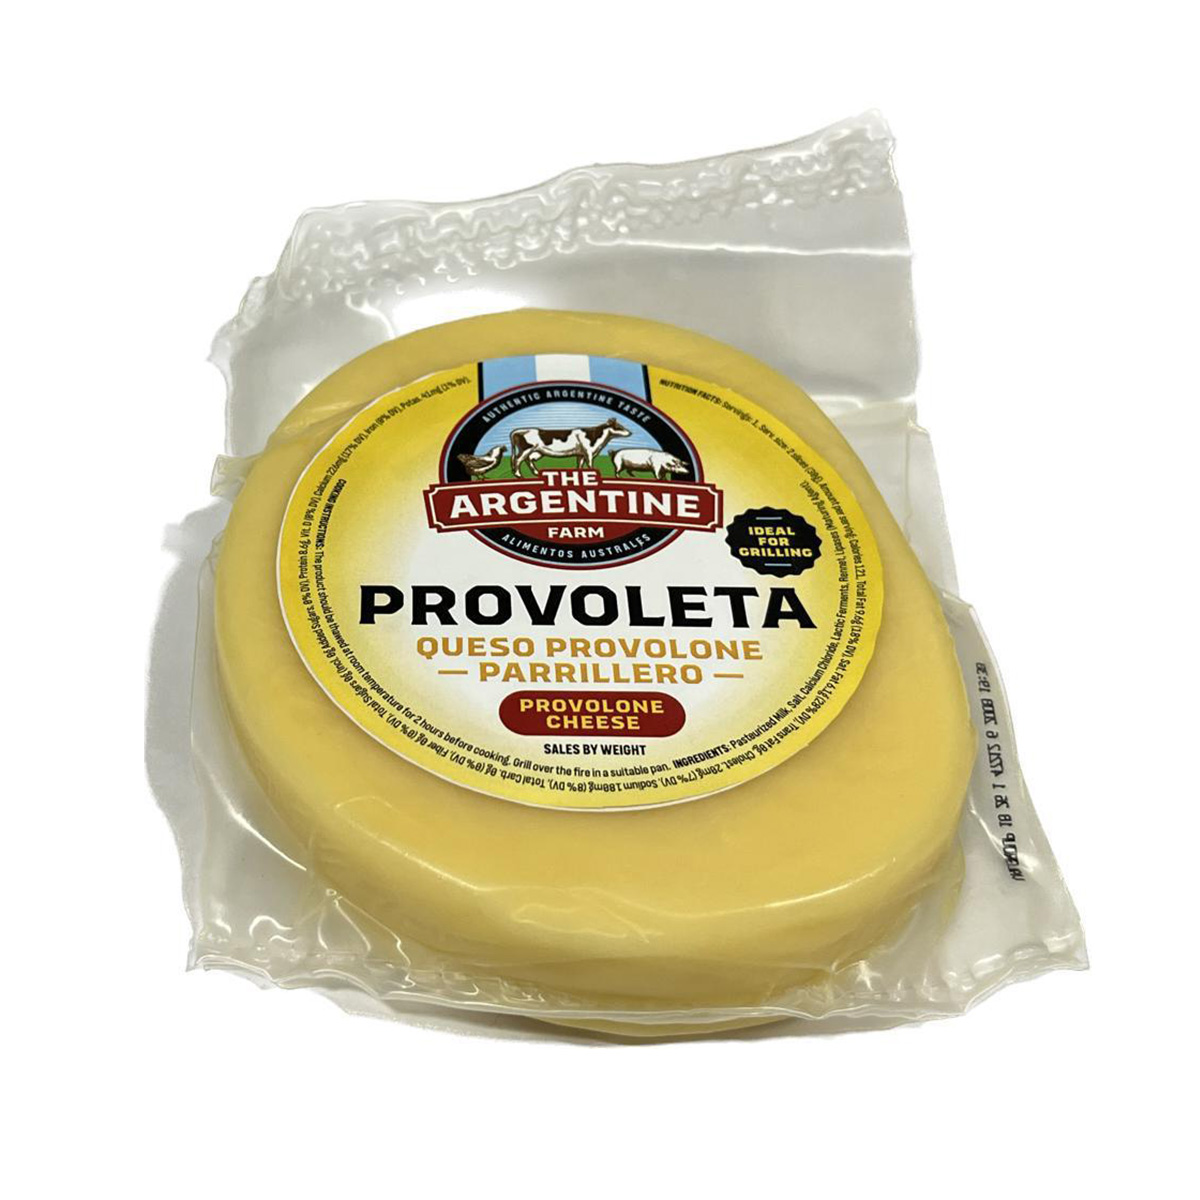 Barbecue Provolone Cheese 8.11 Alimentos oz. Farm Argentine The | x 42 Australes